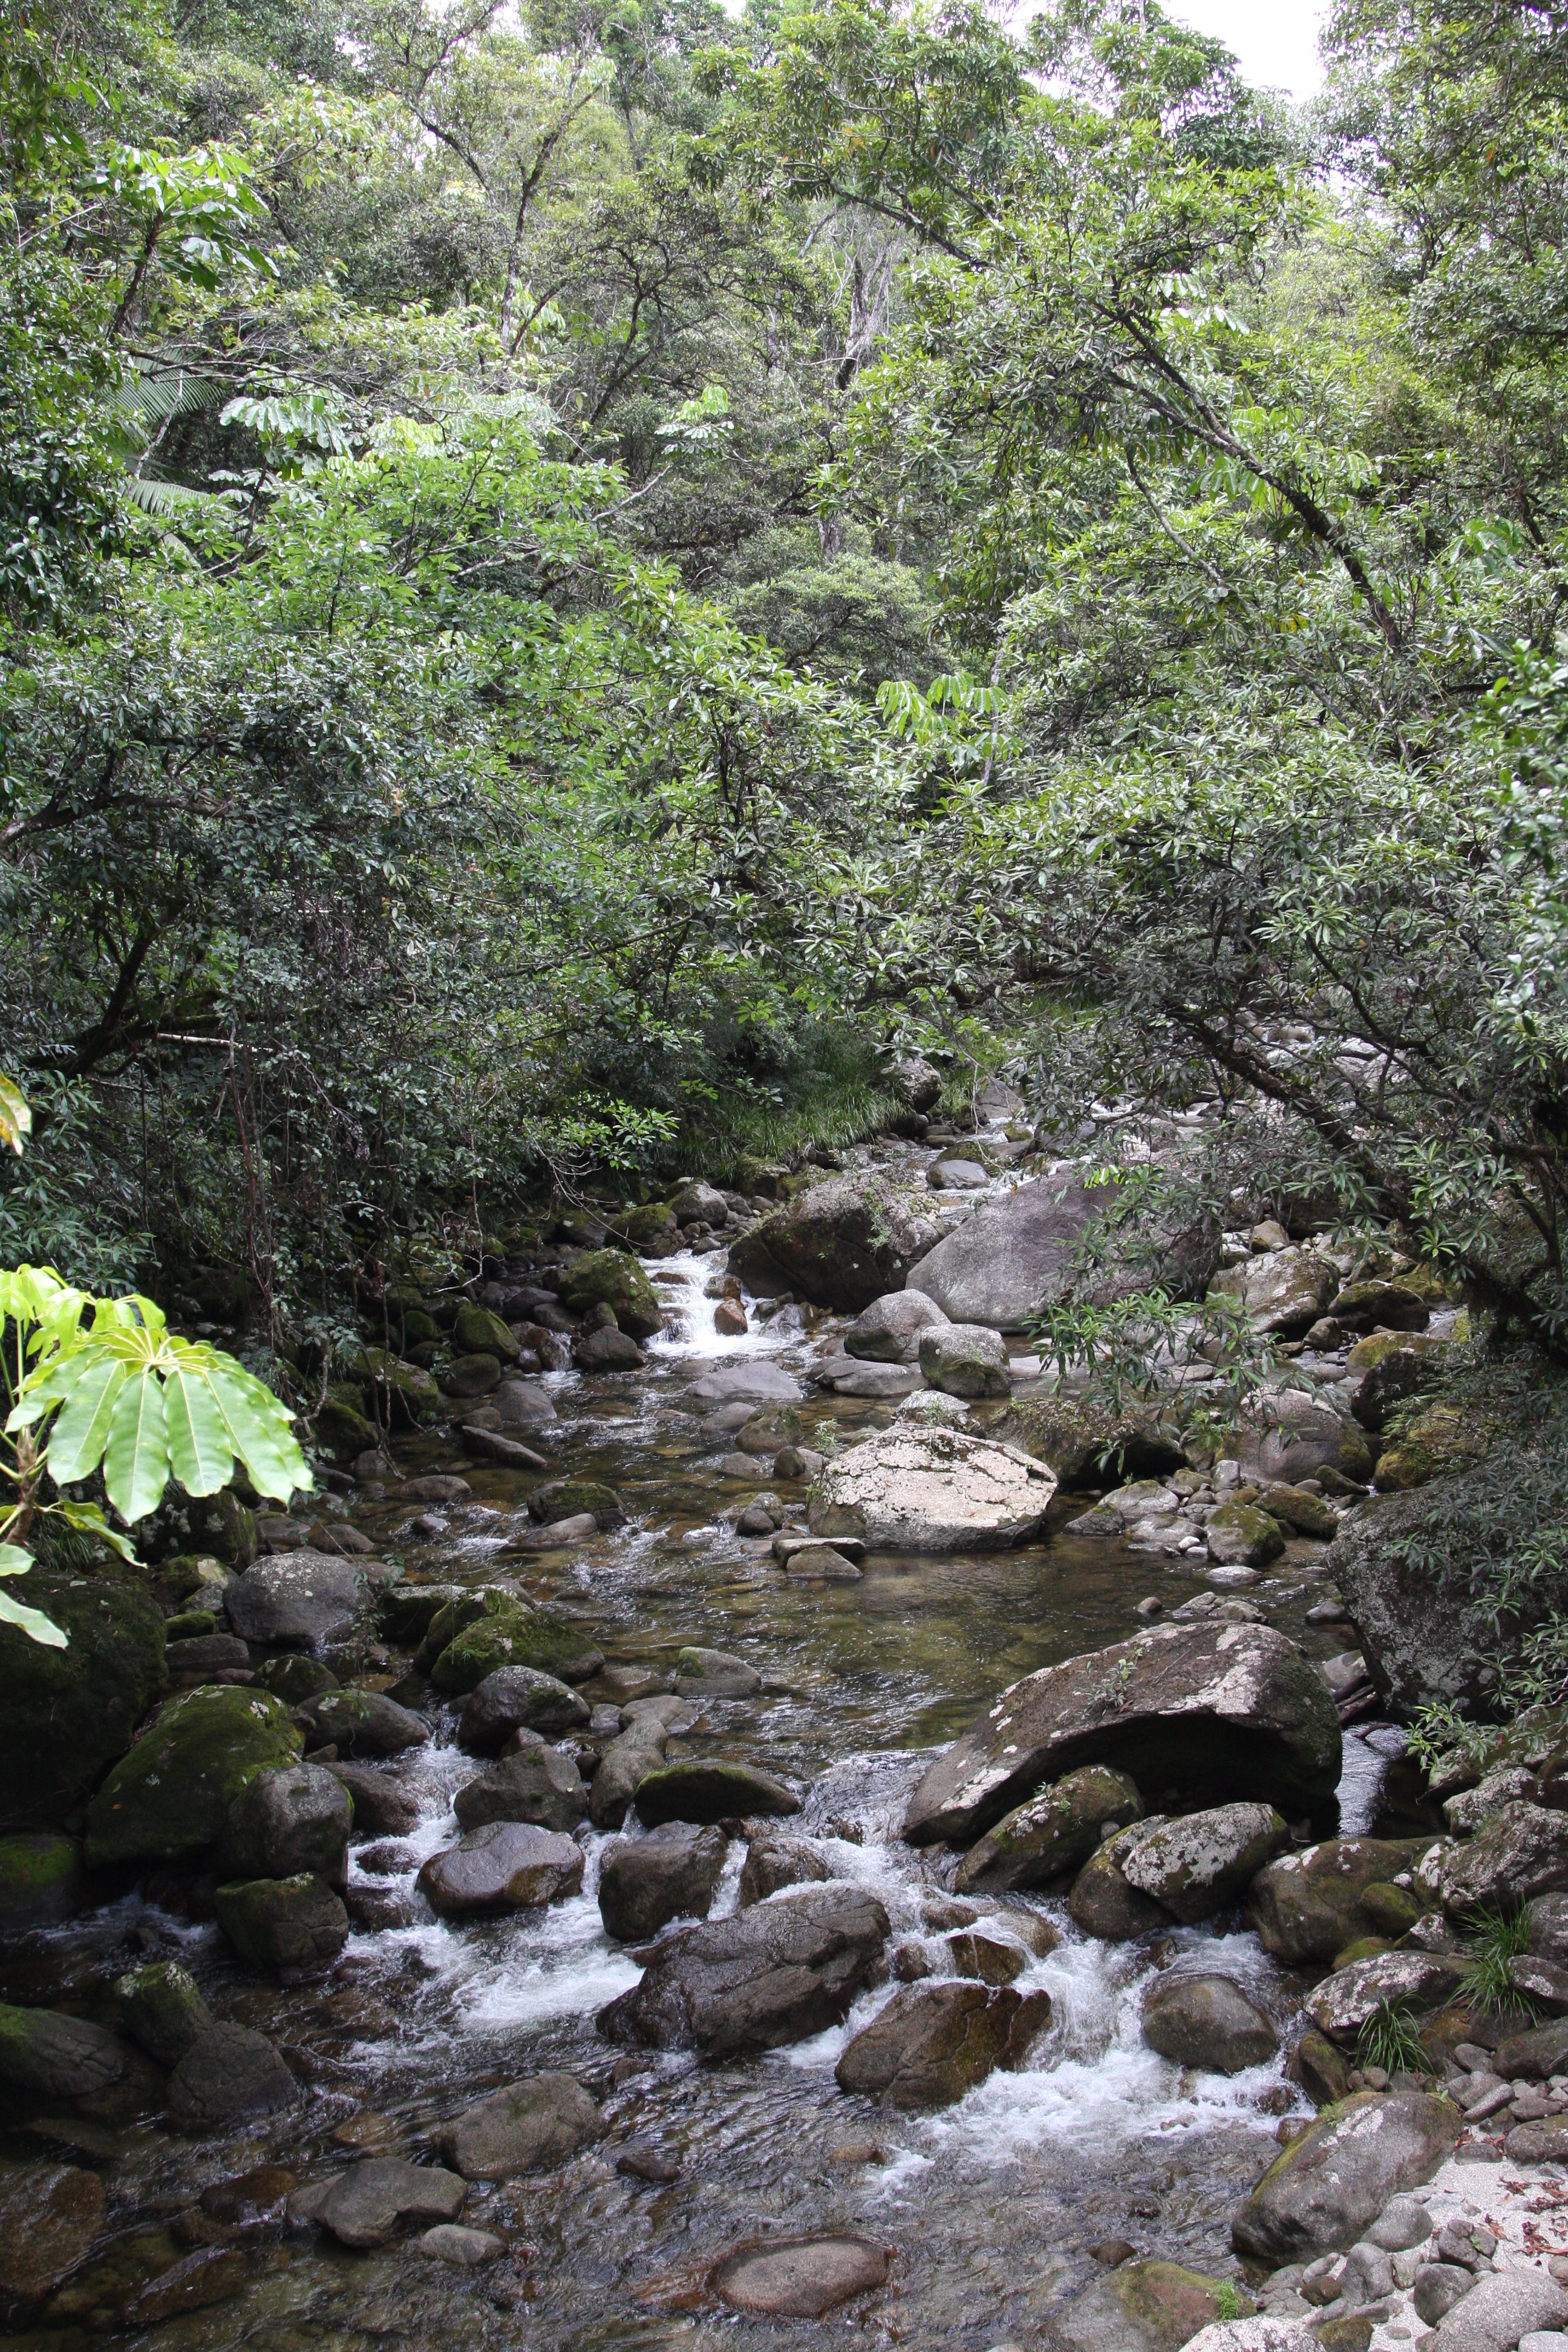 flowing water over rocks surrounded by trees in the Mossman Gorge